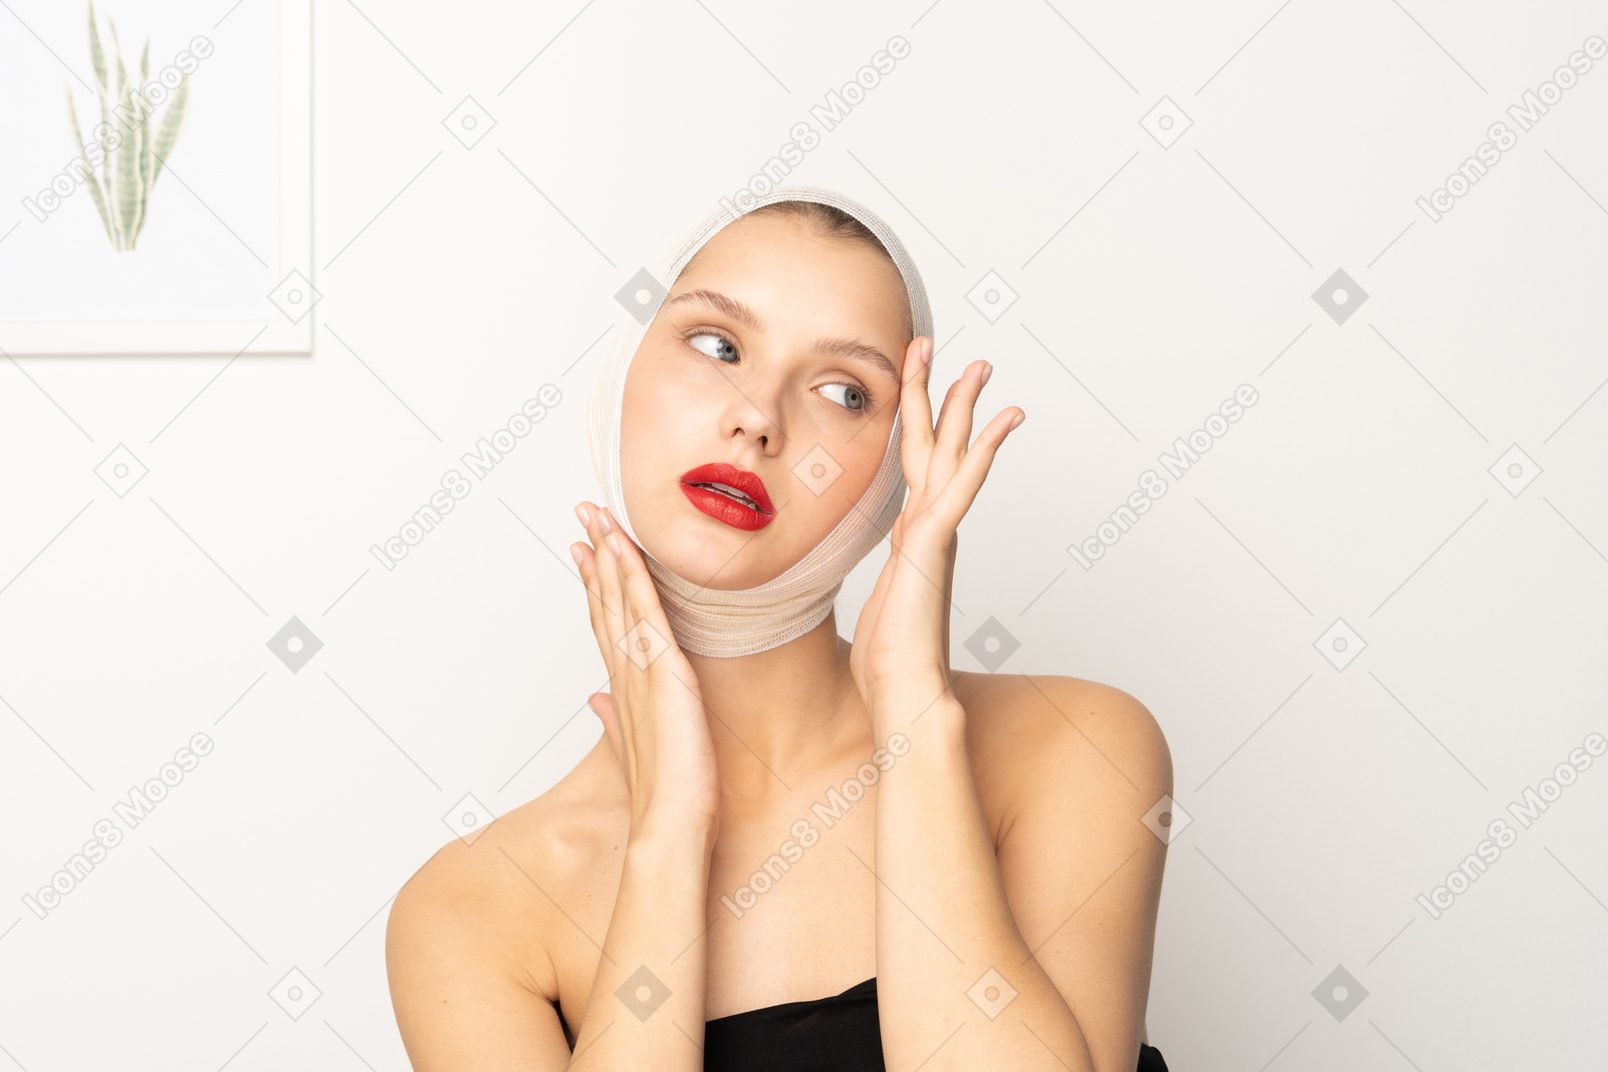 Woman with head bandage touching her face